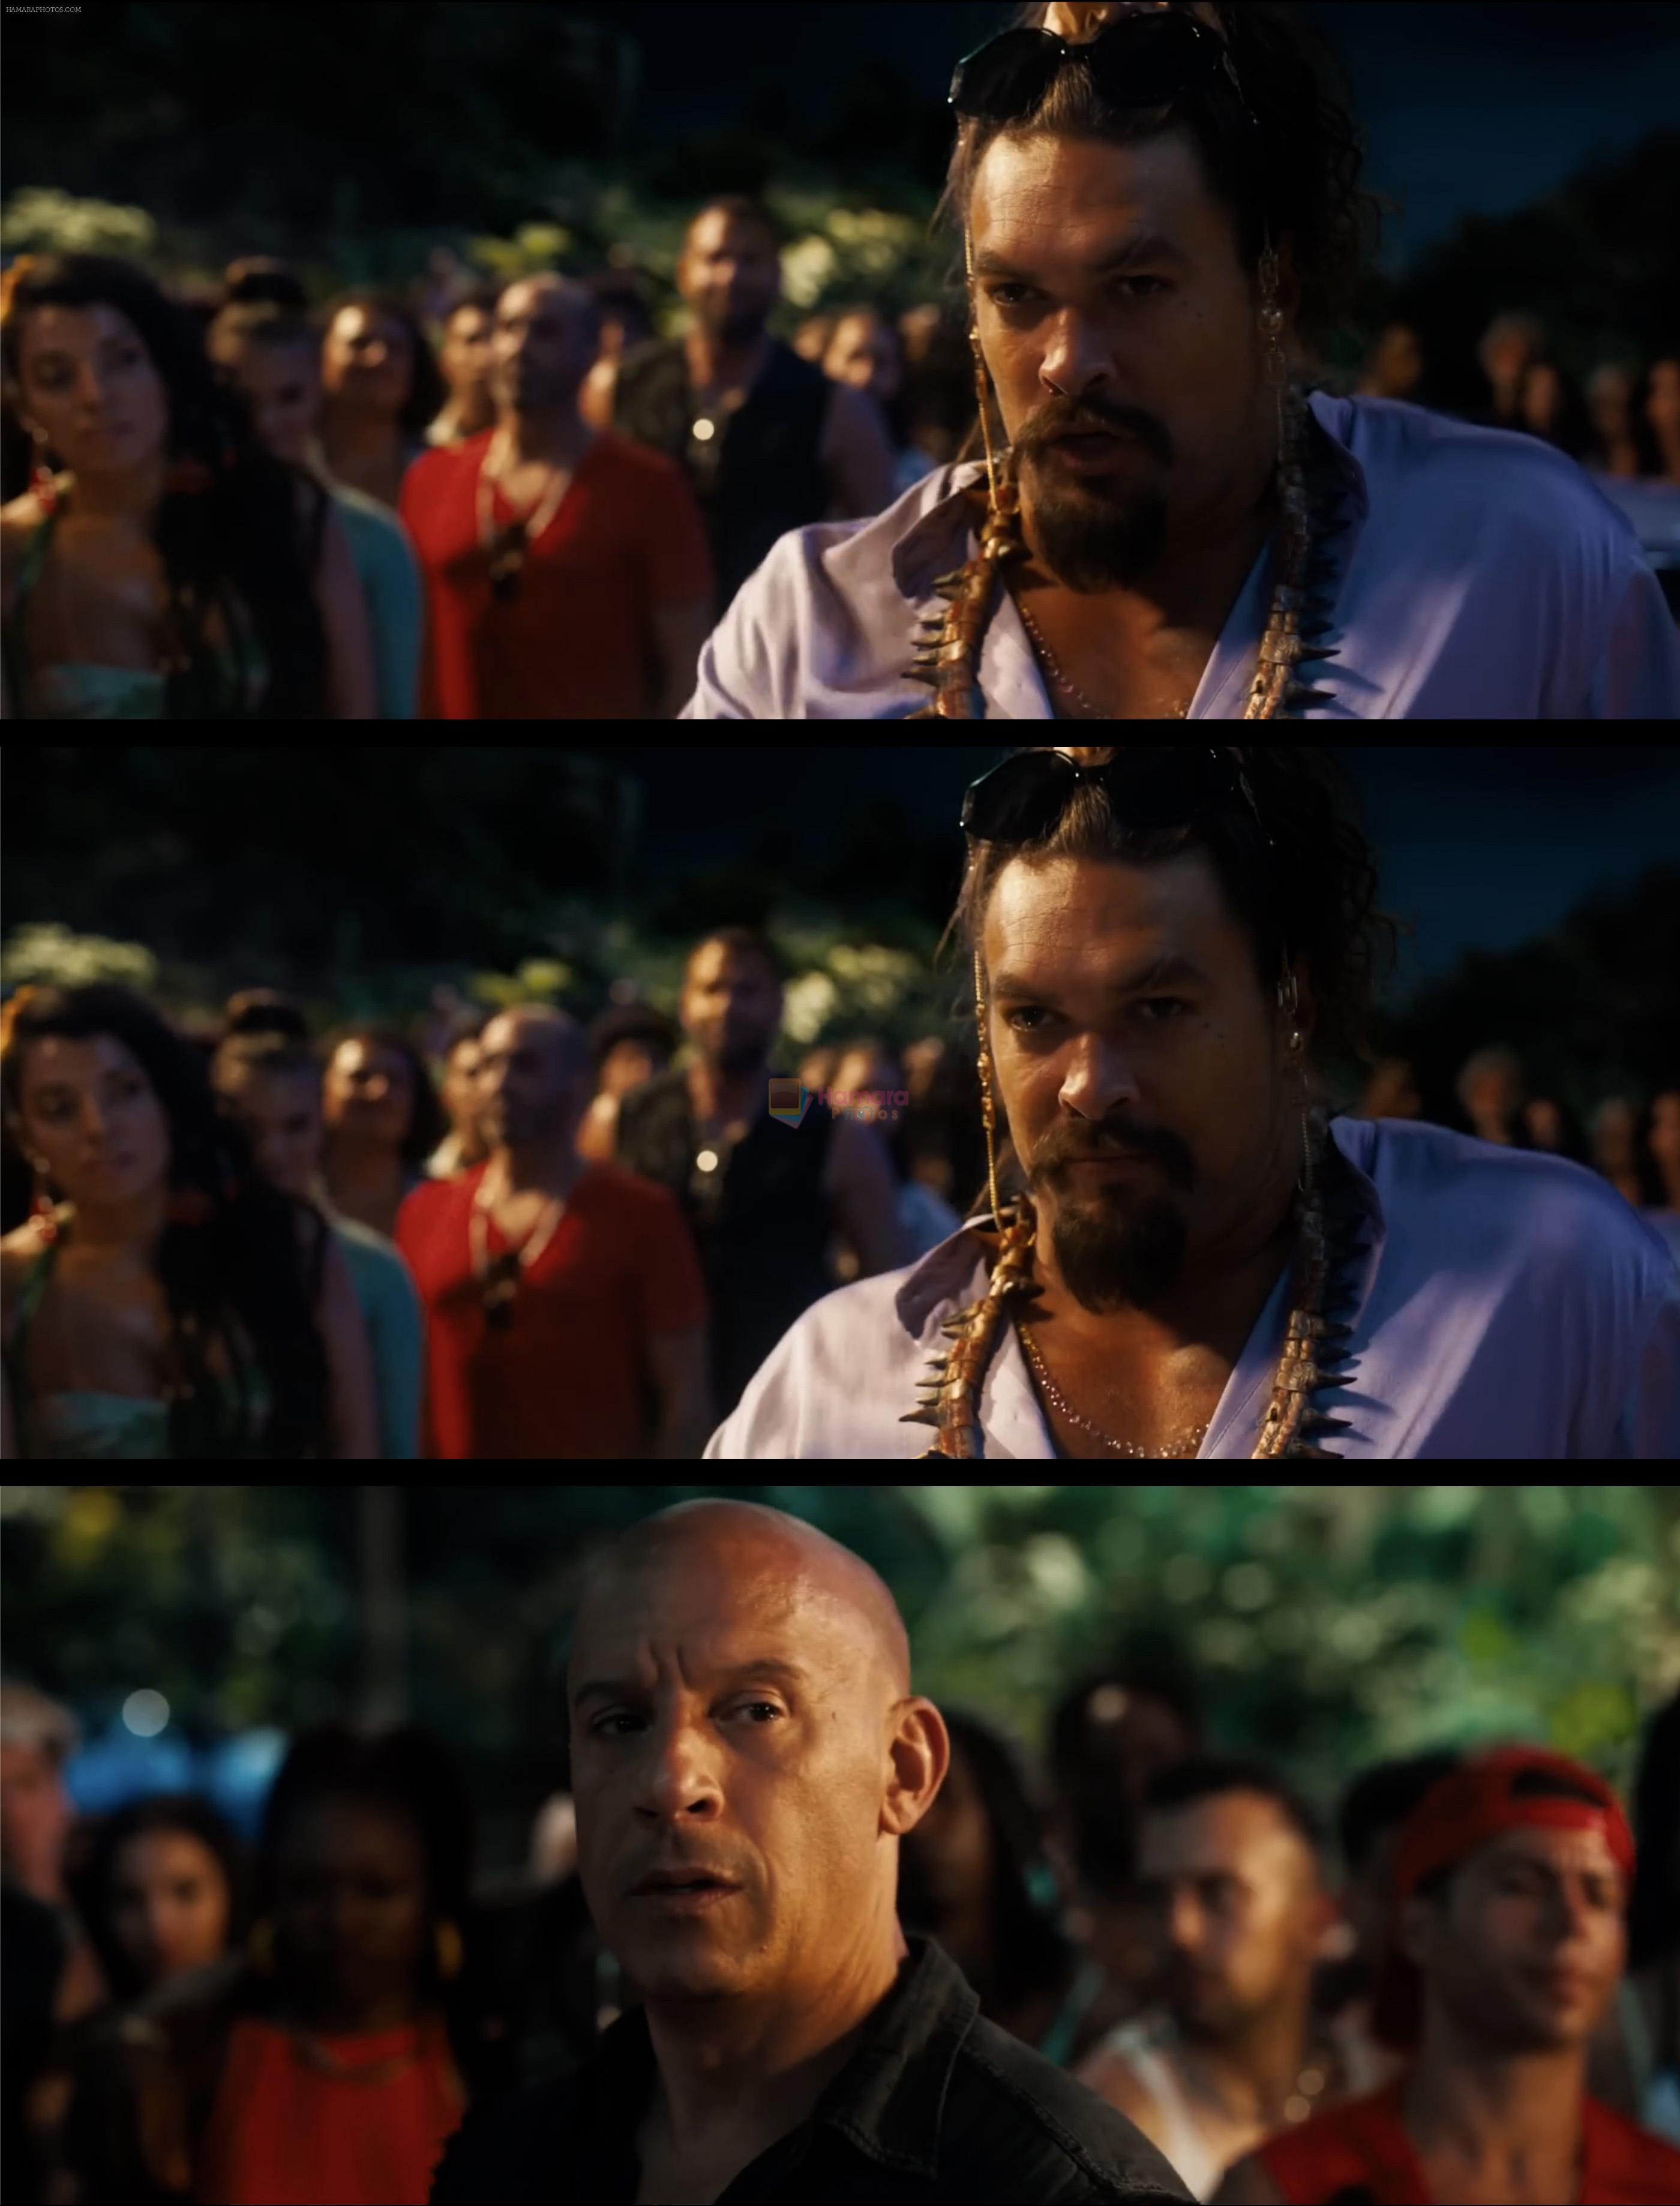 Vin Diesel as Dominic Toretto and Jason Momoa as Dante in Still from movie Fast X